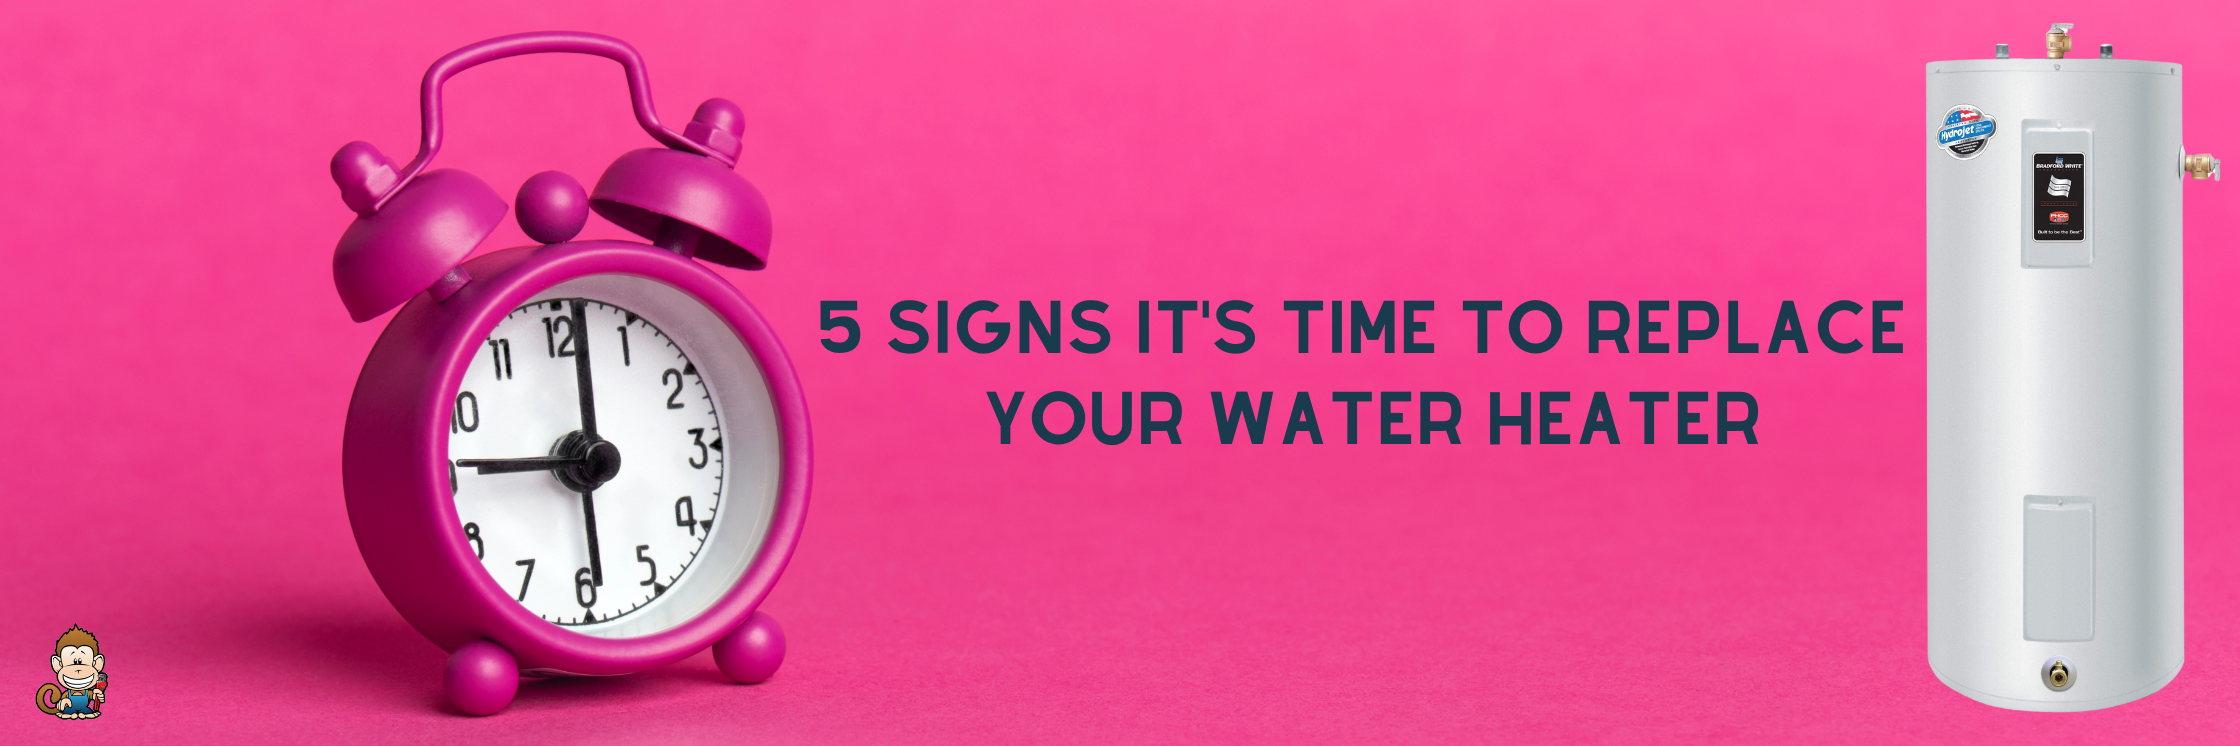 5 Signs It's Time To Replace Your Water Heater